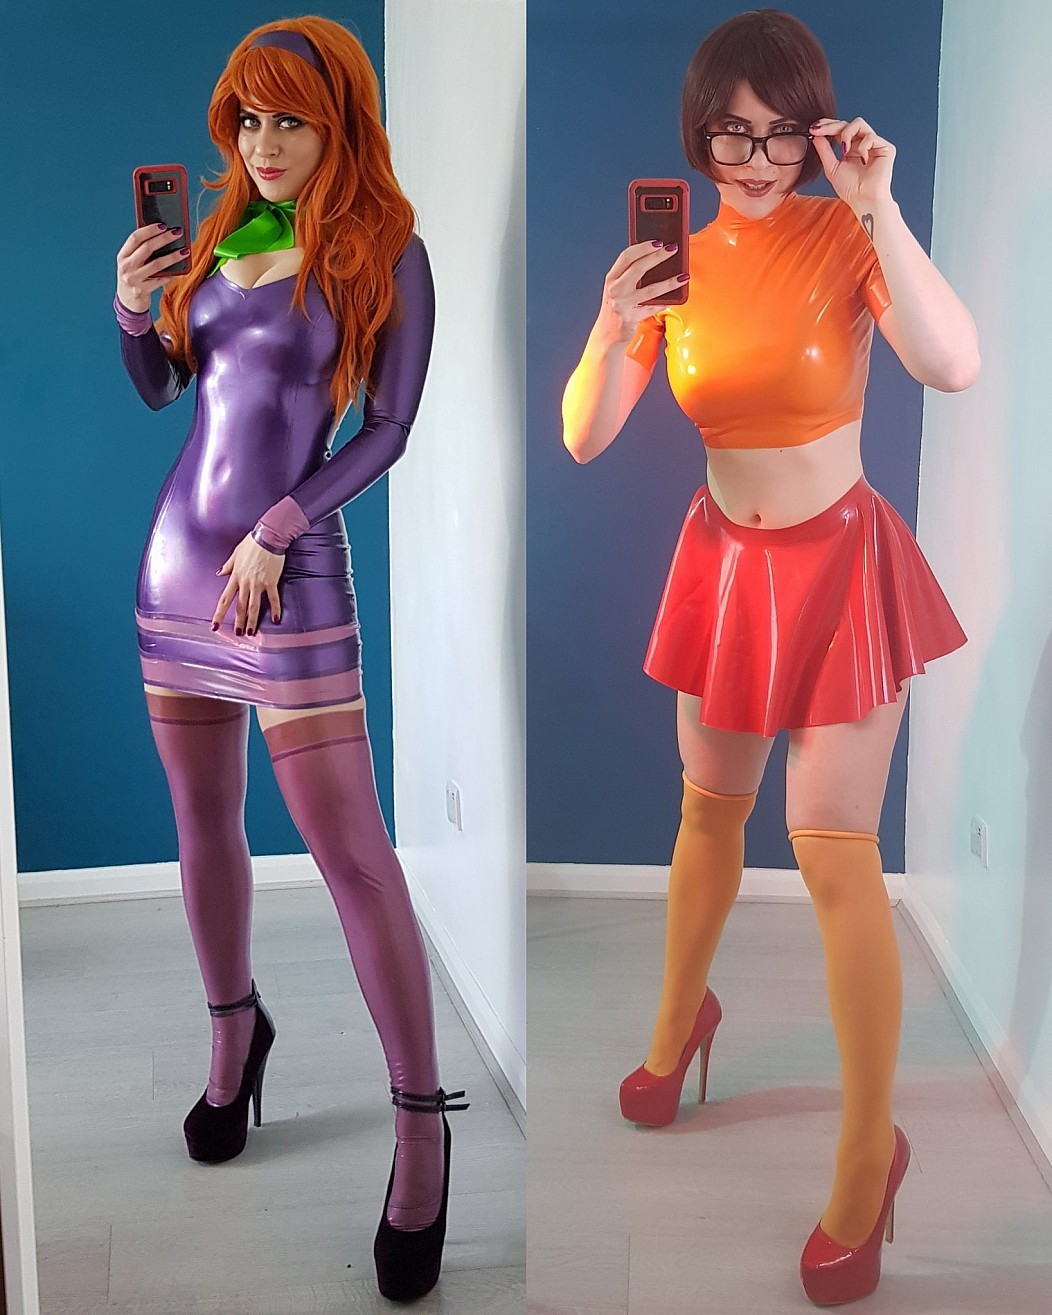 Daphne Cosplay Scooby Doo Porn - View Purplemuffinz as Daphne and Velma (Scooby Doo) for free | Simply- Cosplay